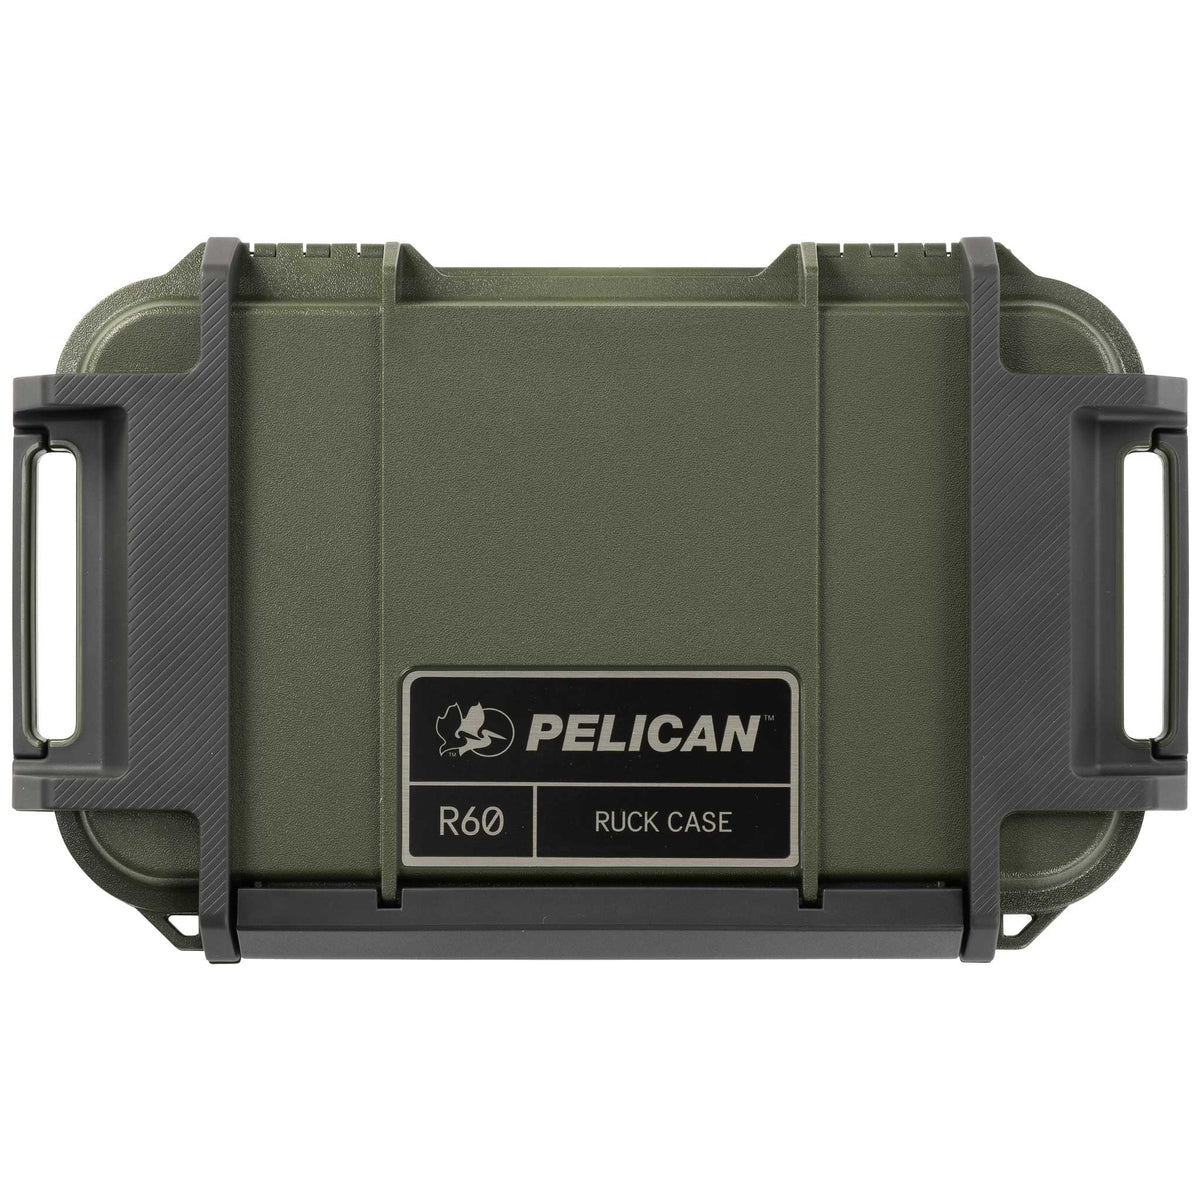 Pelican Ruck Case - The Ultimate Dry Box